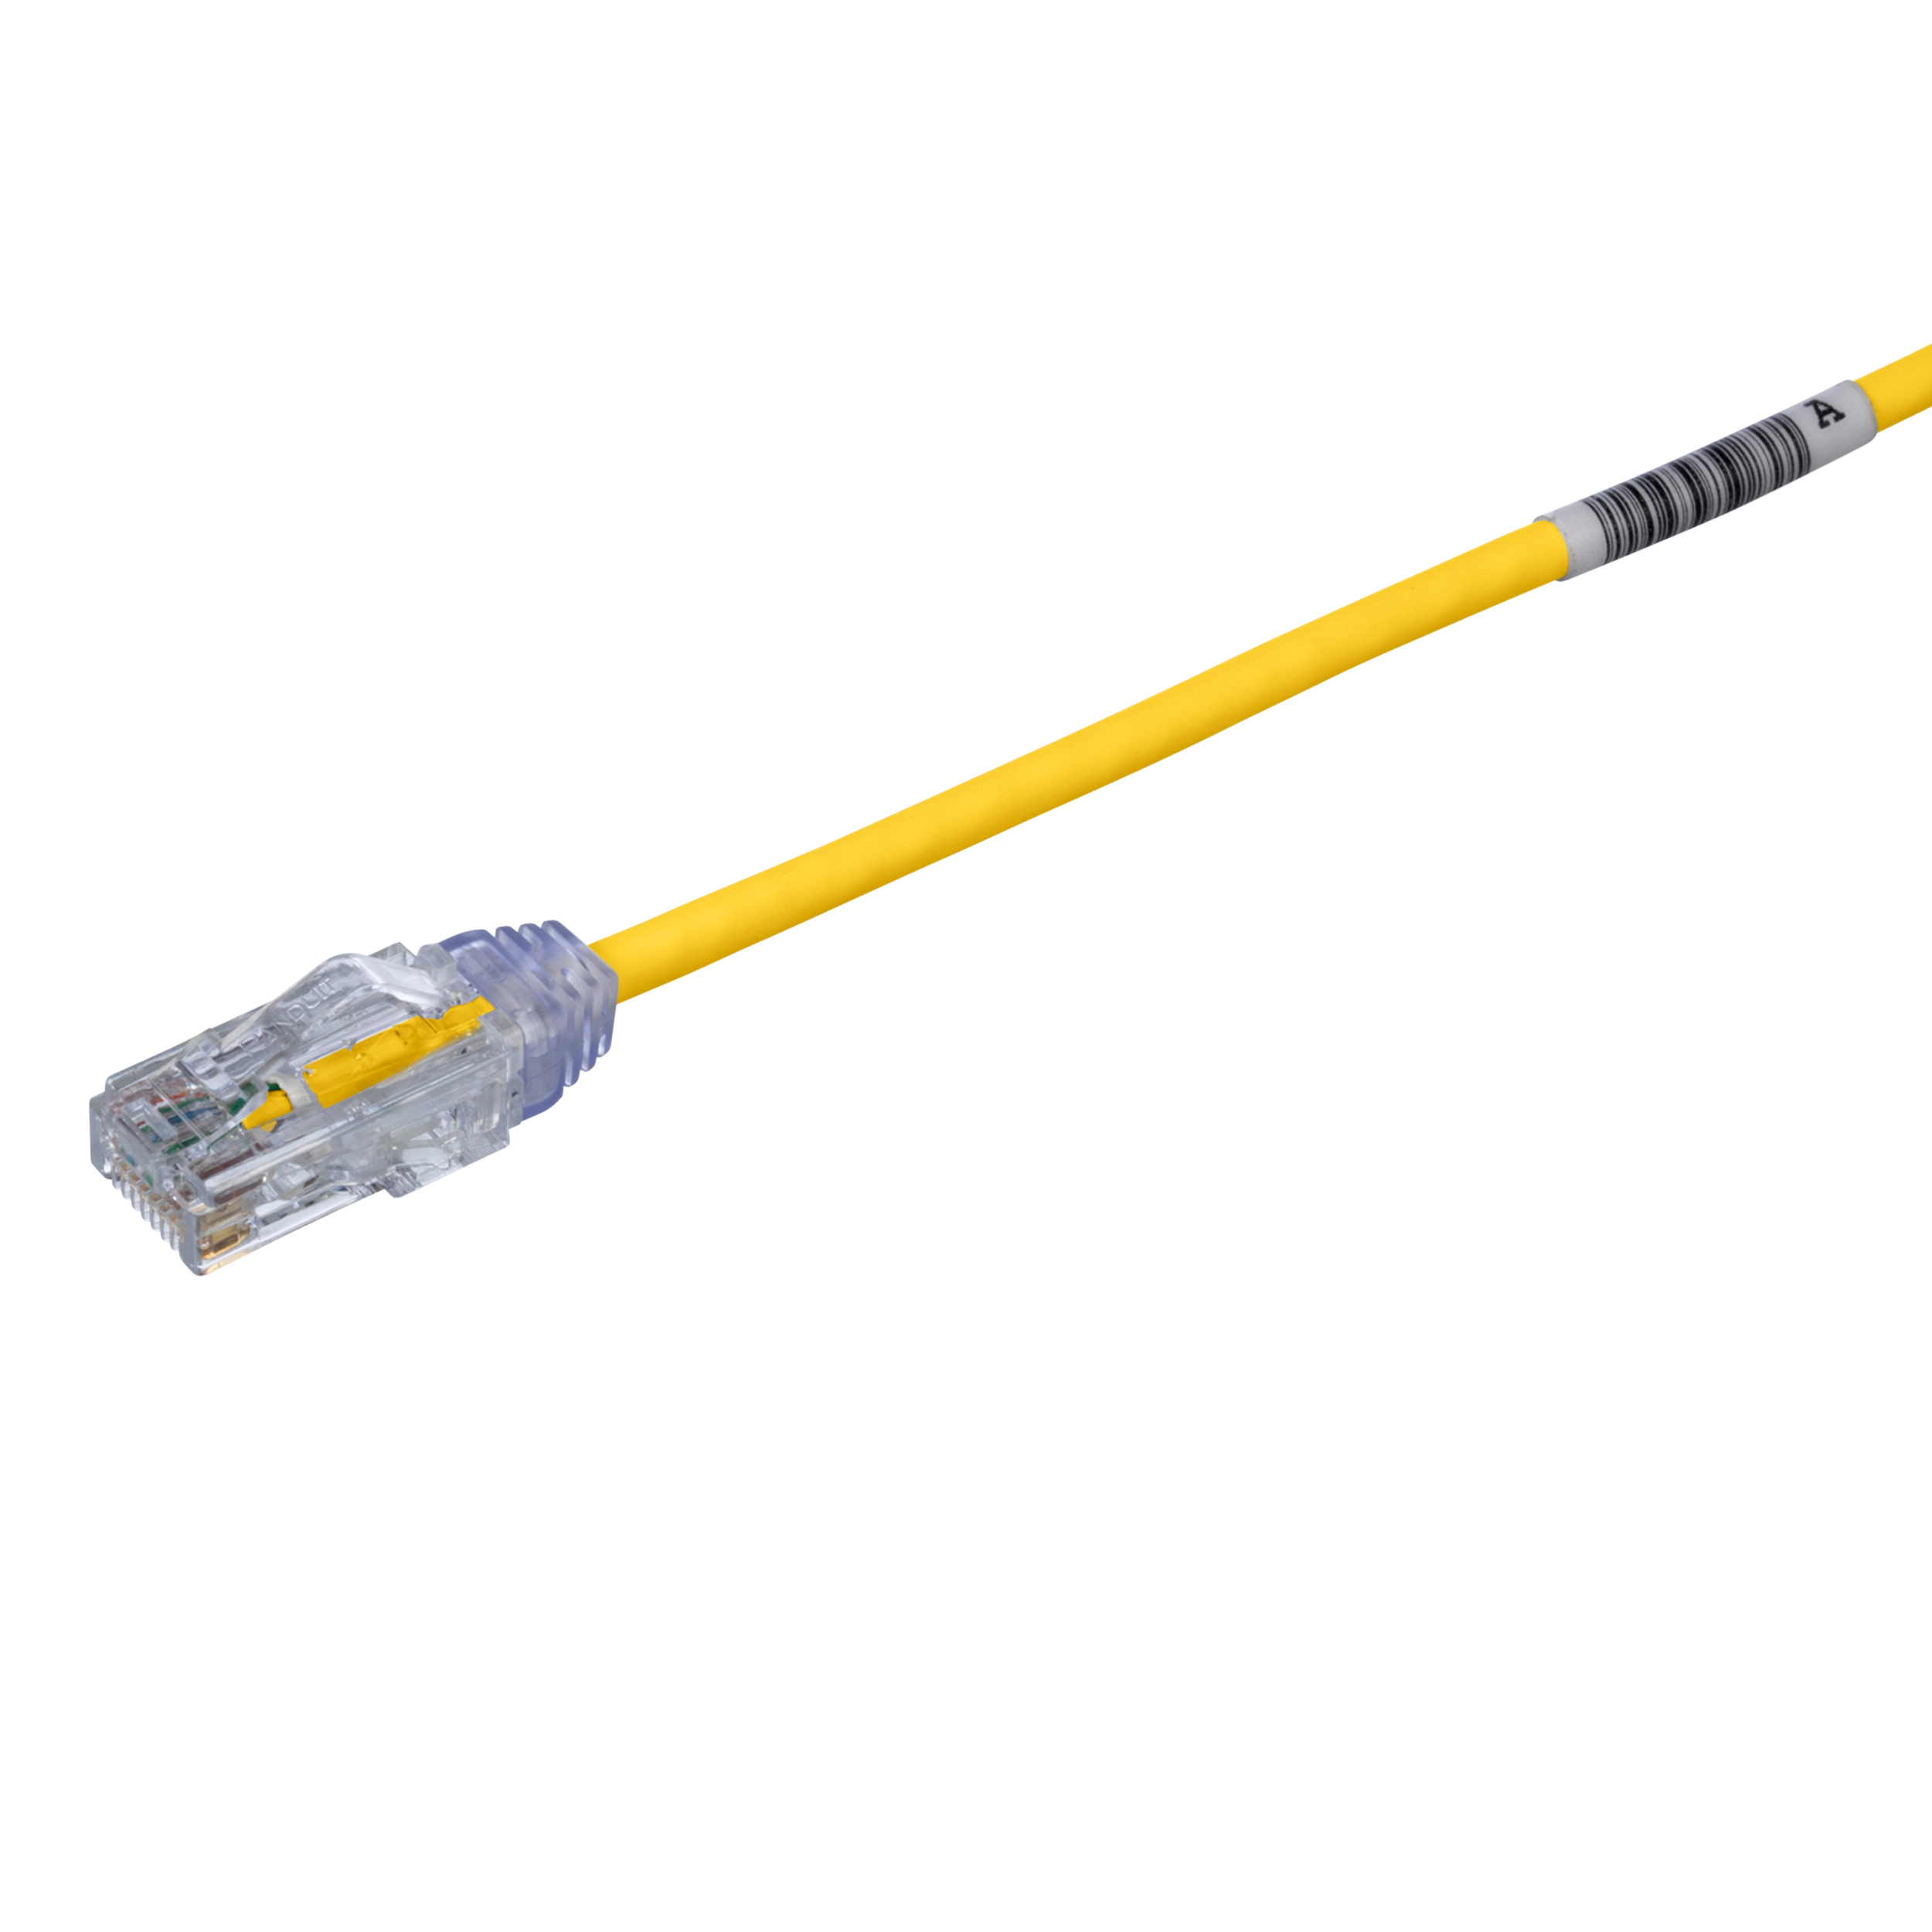 Cat 6 28 AWG UTP Copper Patch Cord, 1.5